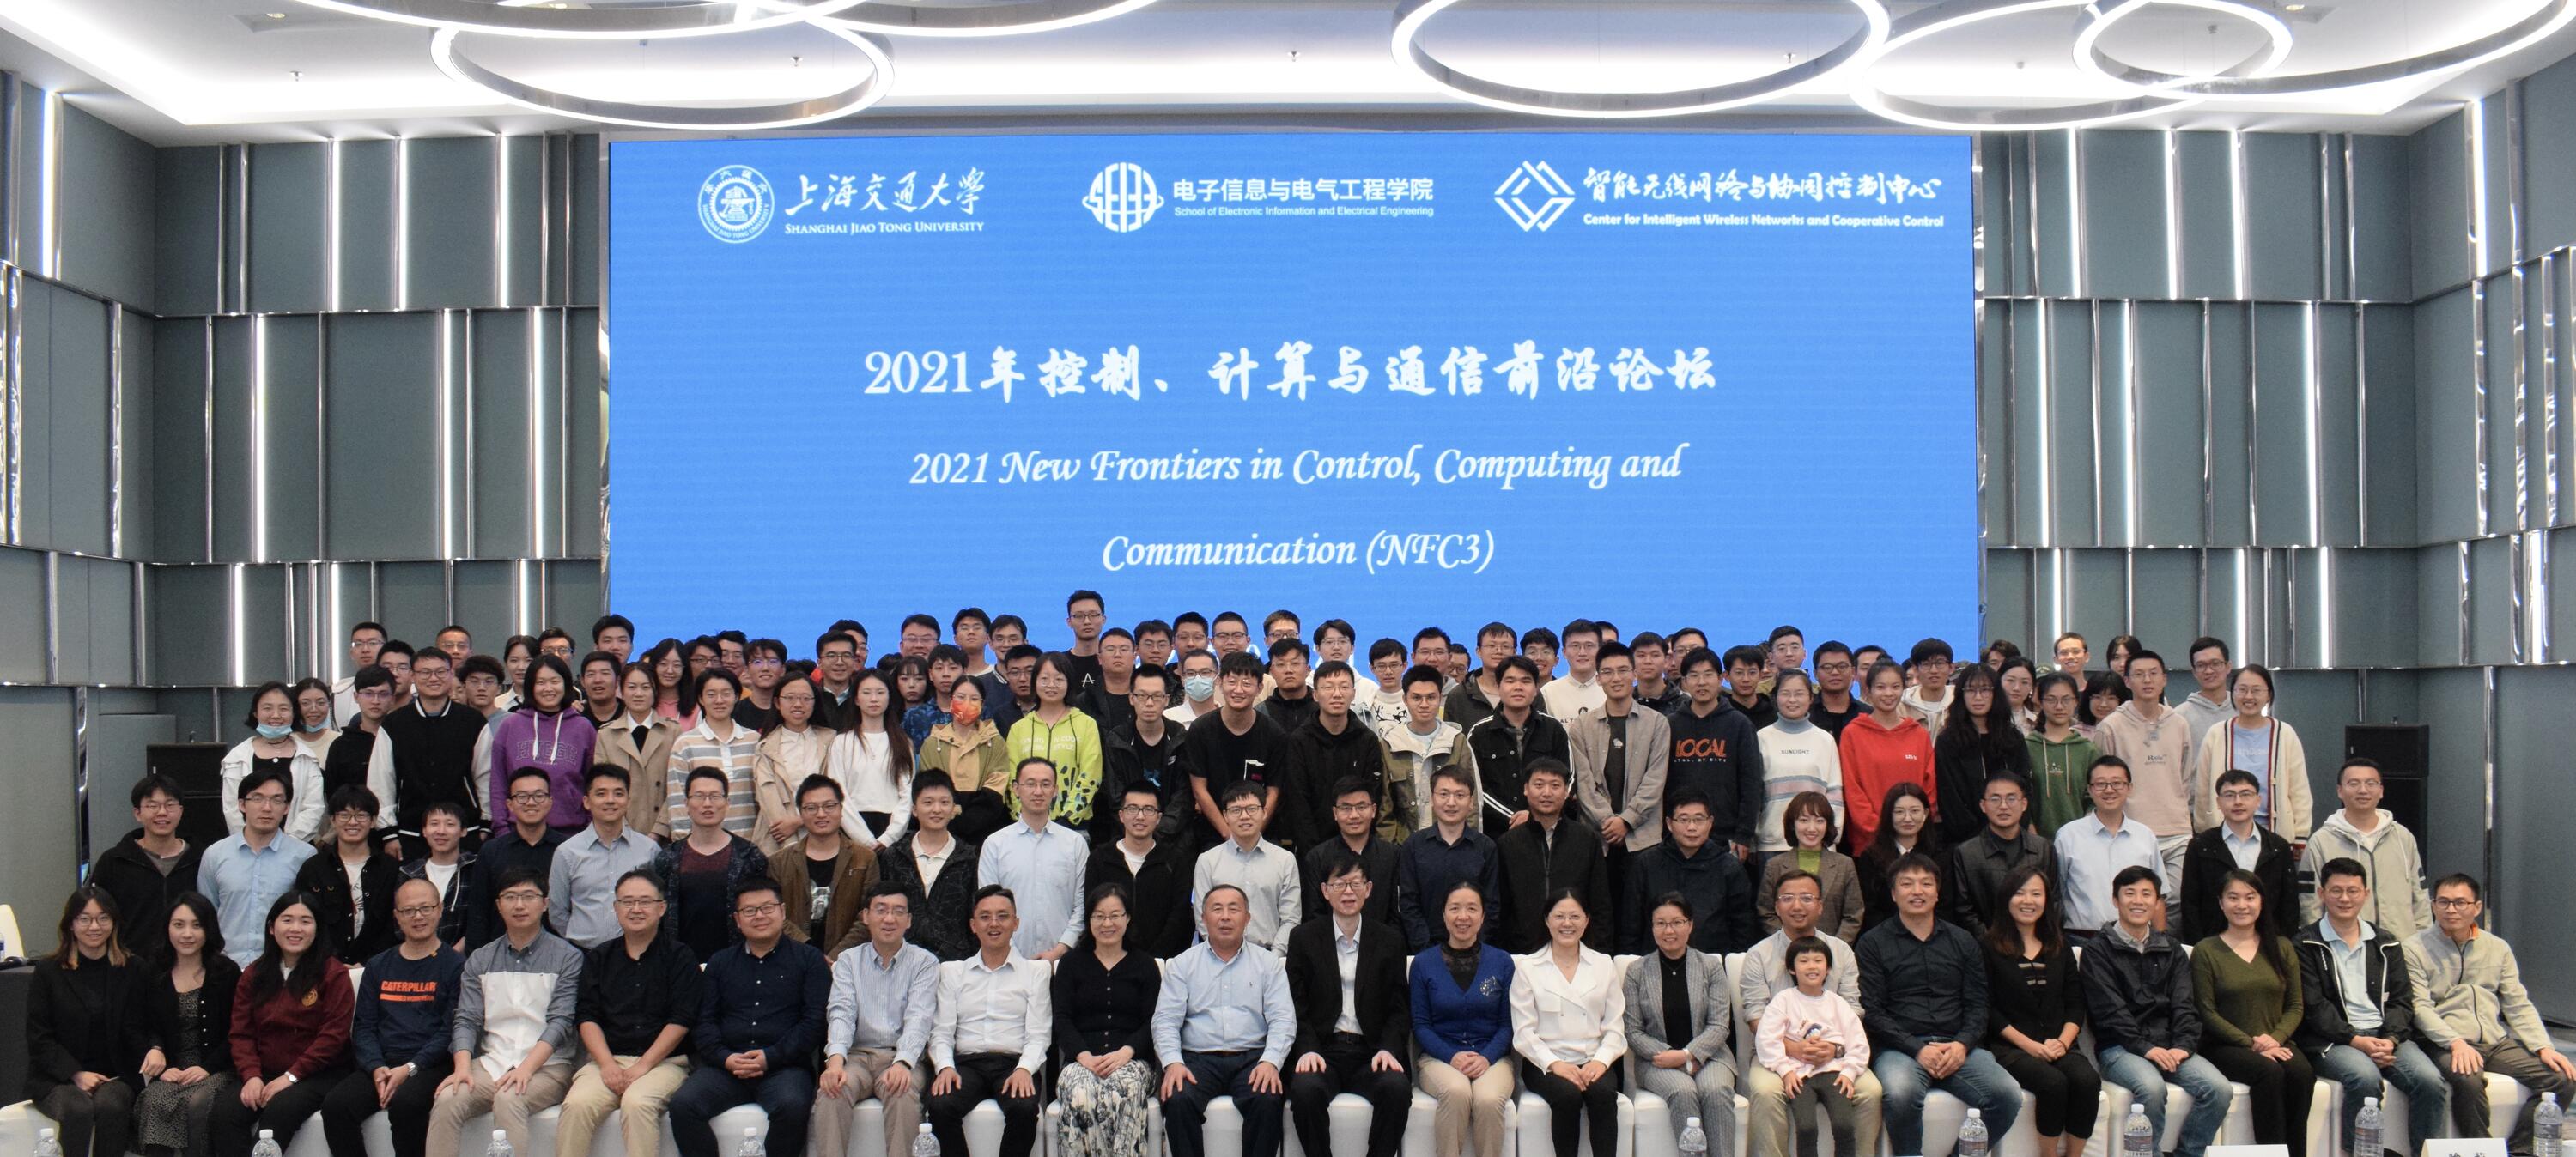 Prof. Shen and other BBCR members attended the 2021 New Frontiers in Control, Computing and Communication, at Shanghai Jiaotong University, Shanghai, China, on Oct 17, 2021.